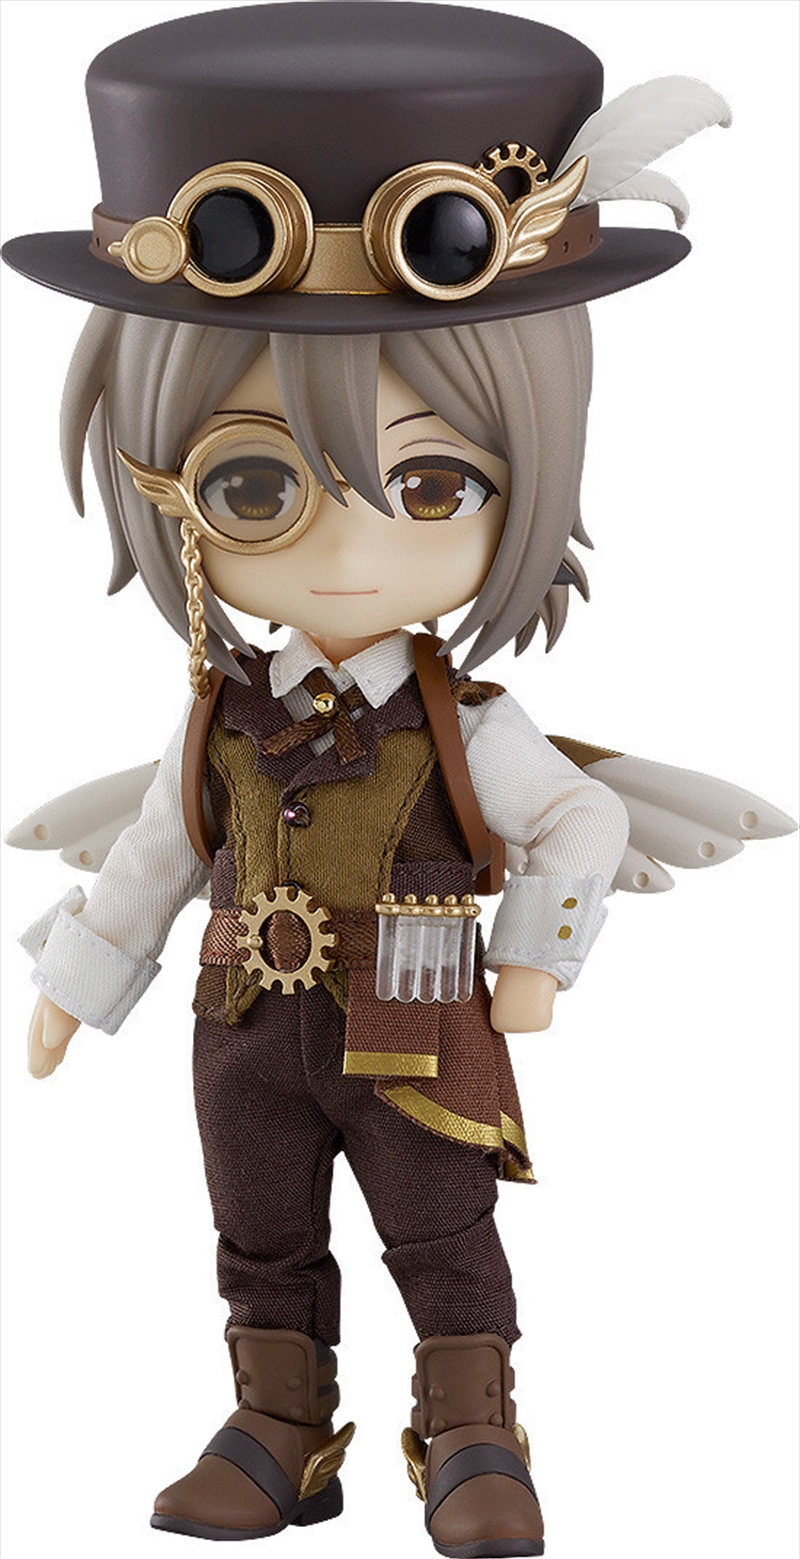 Nendoroid Doll Inventor Kanou/Product Detail/Figurines